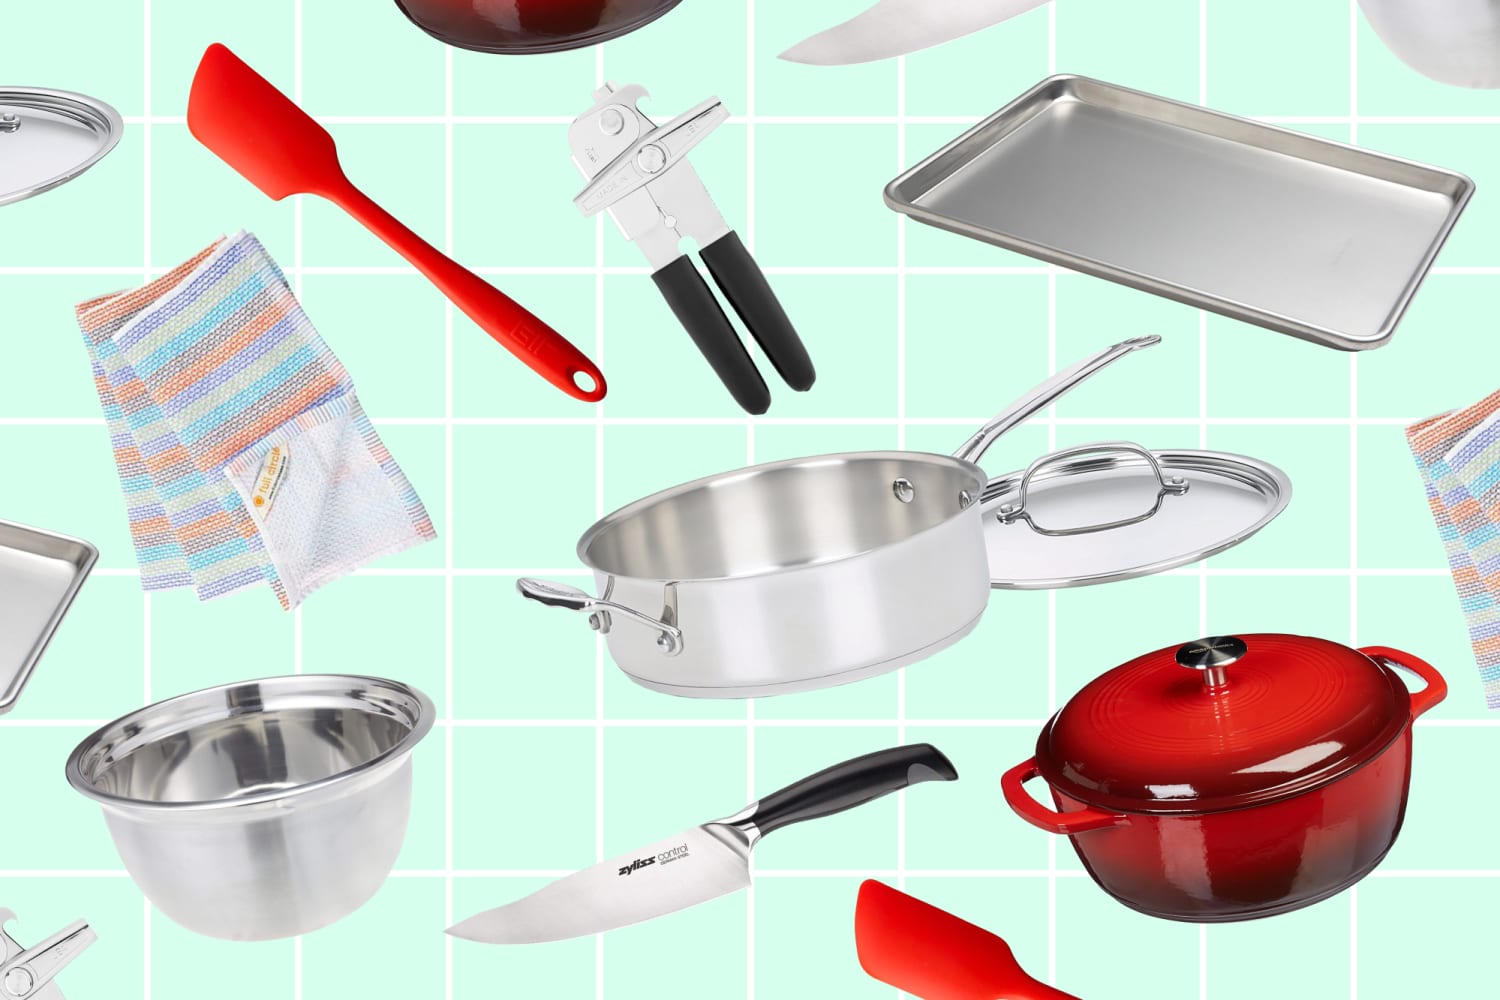 Essential Kitchen Gear and Tools You Need Two (or More) Of